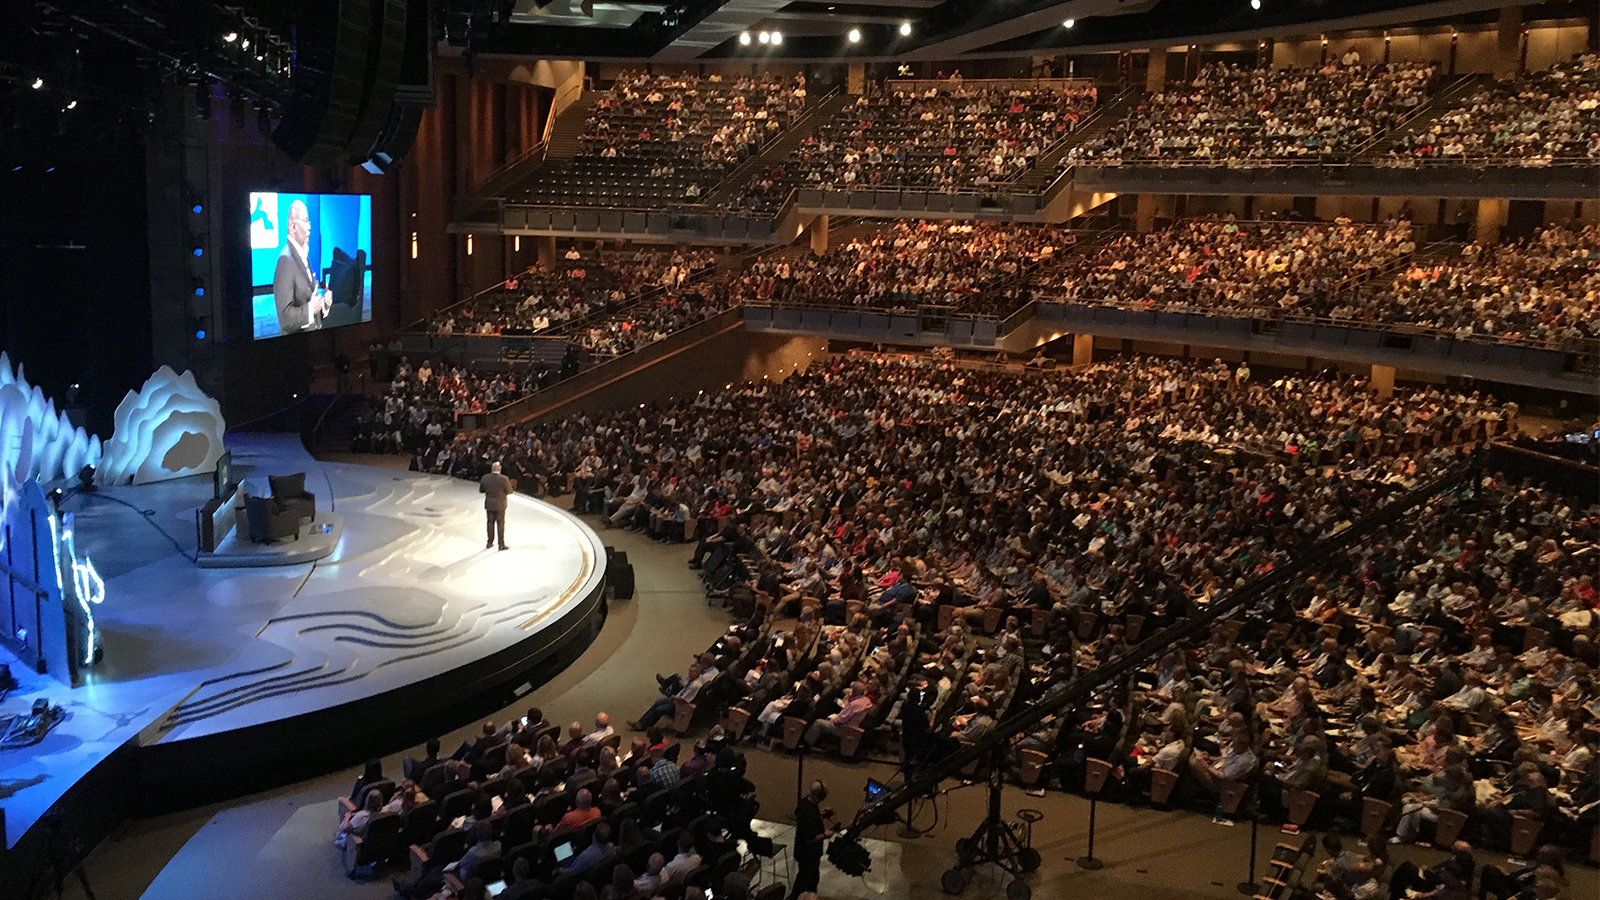 The main campus of Willow Creek Community Church in South Barrington, Ill. Photo courtesy of Global Leadership Summit